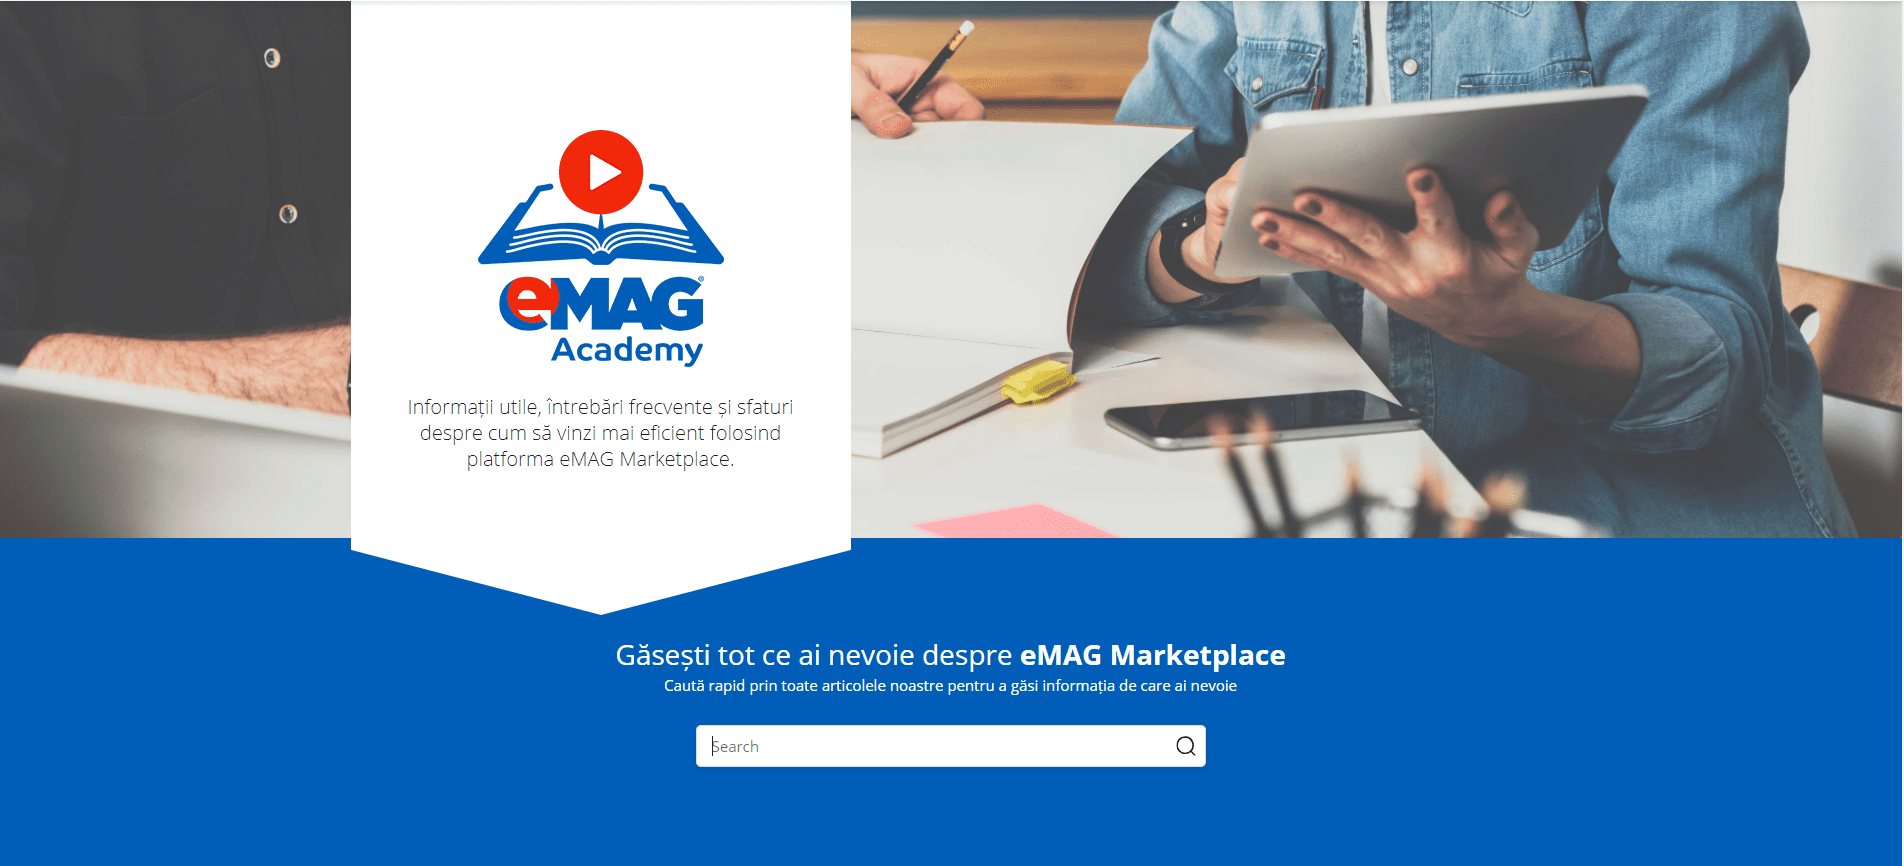 Microcomputer curly telex eMAG Academy – eMAG Marketplace